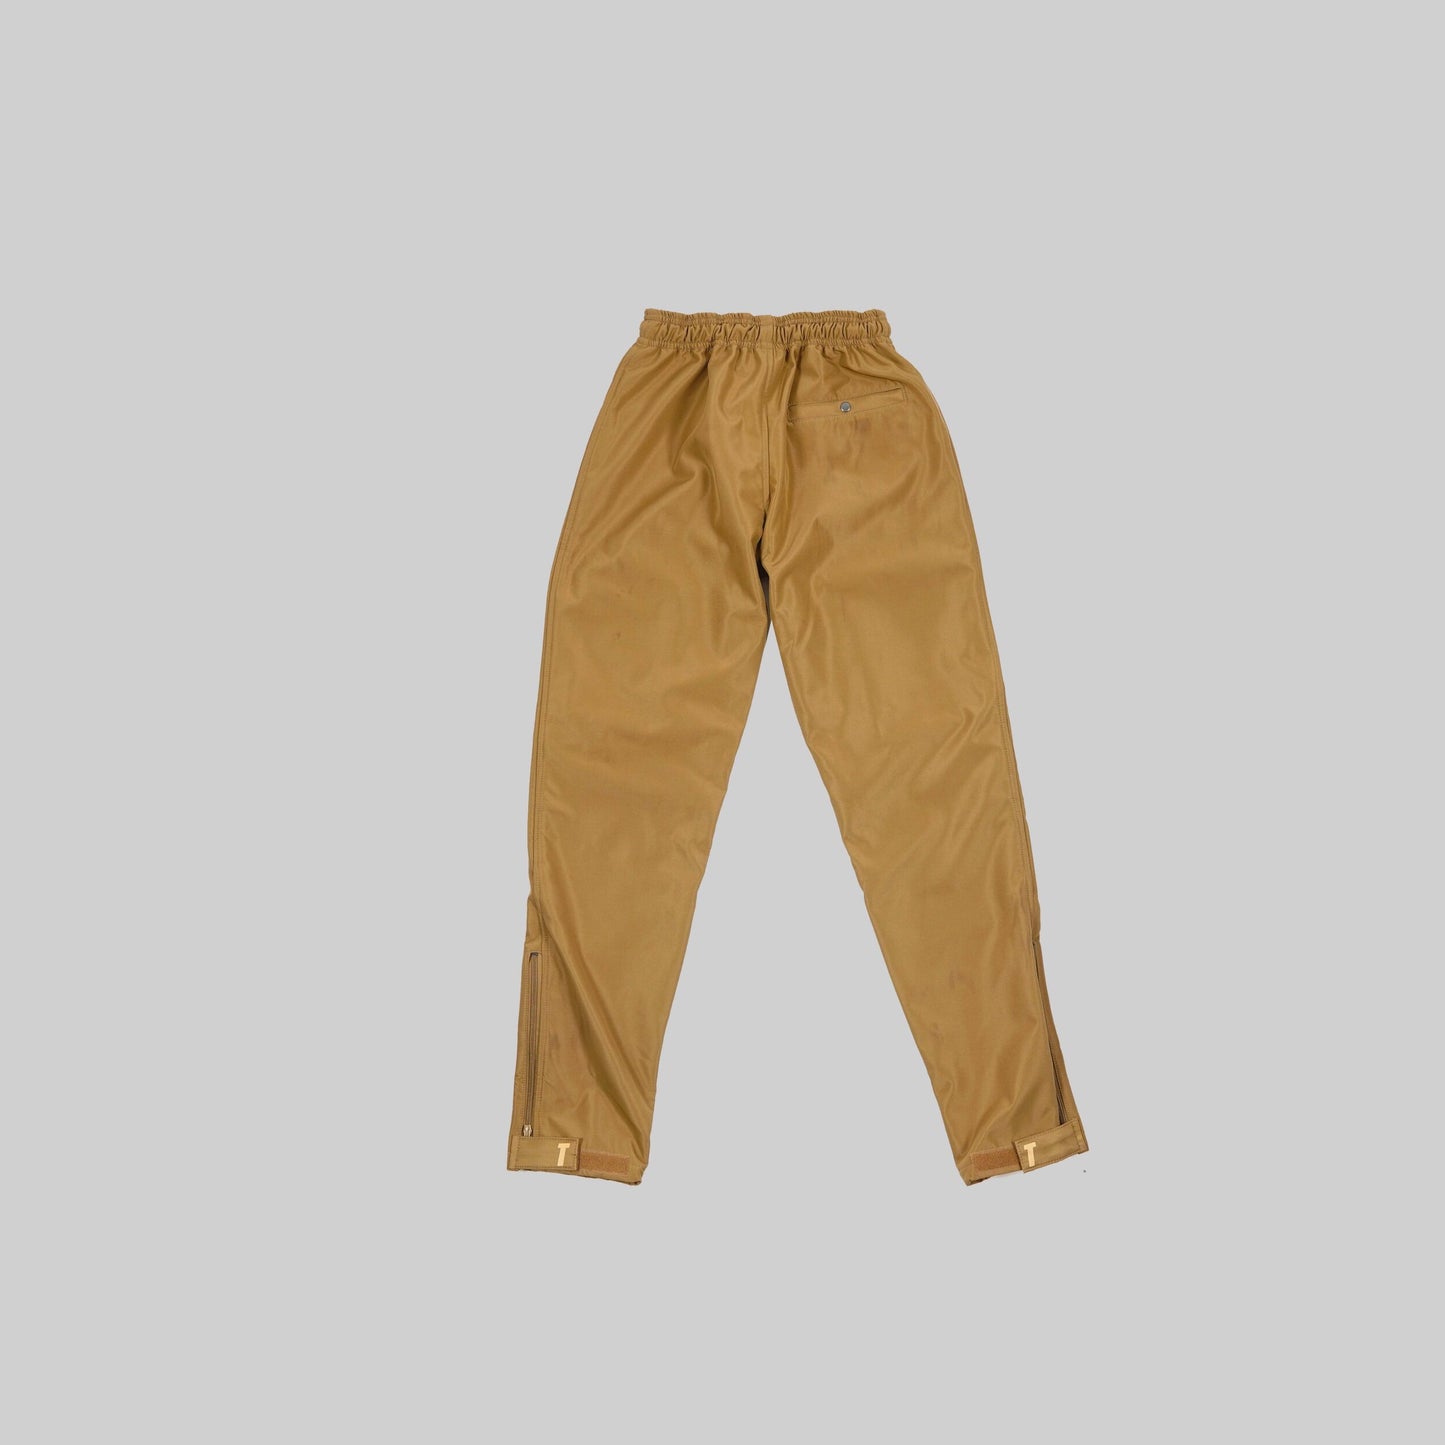 GOLD TIER SPACE V2 CARGO PANT